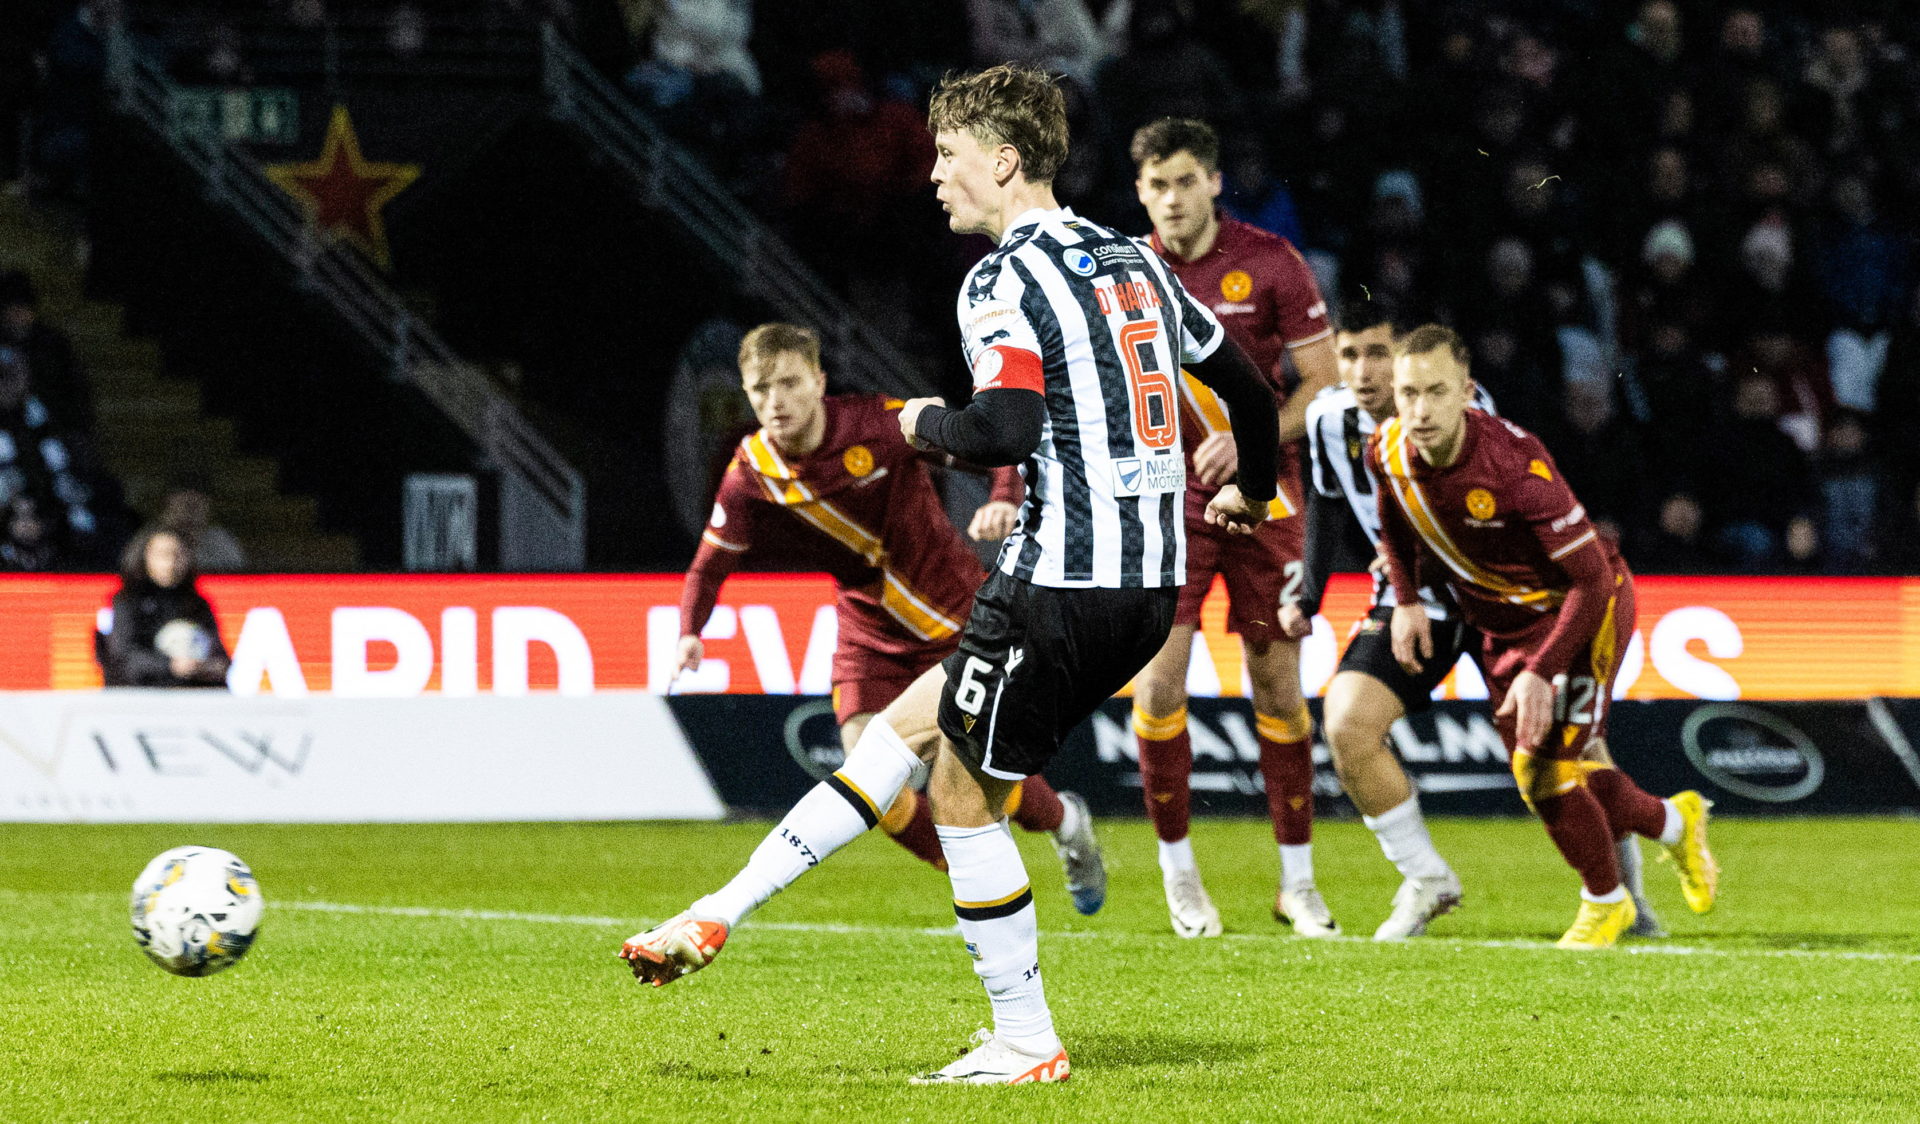 Motherwell’s winless streak continues after 0-0 draw against St Mirren